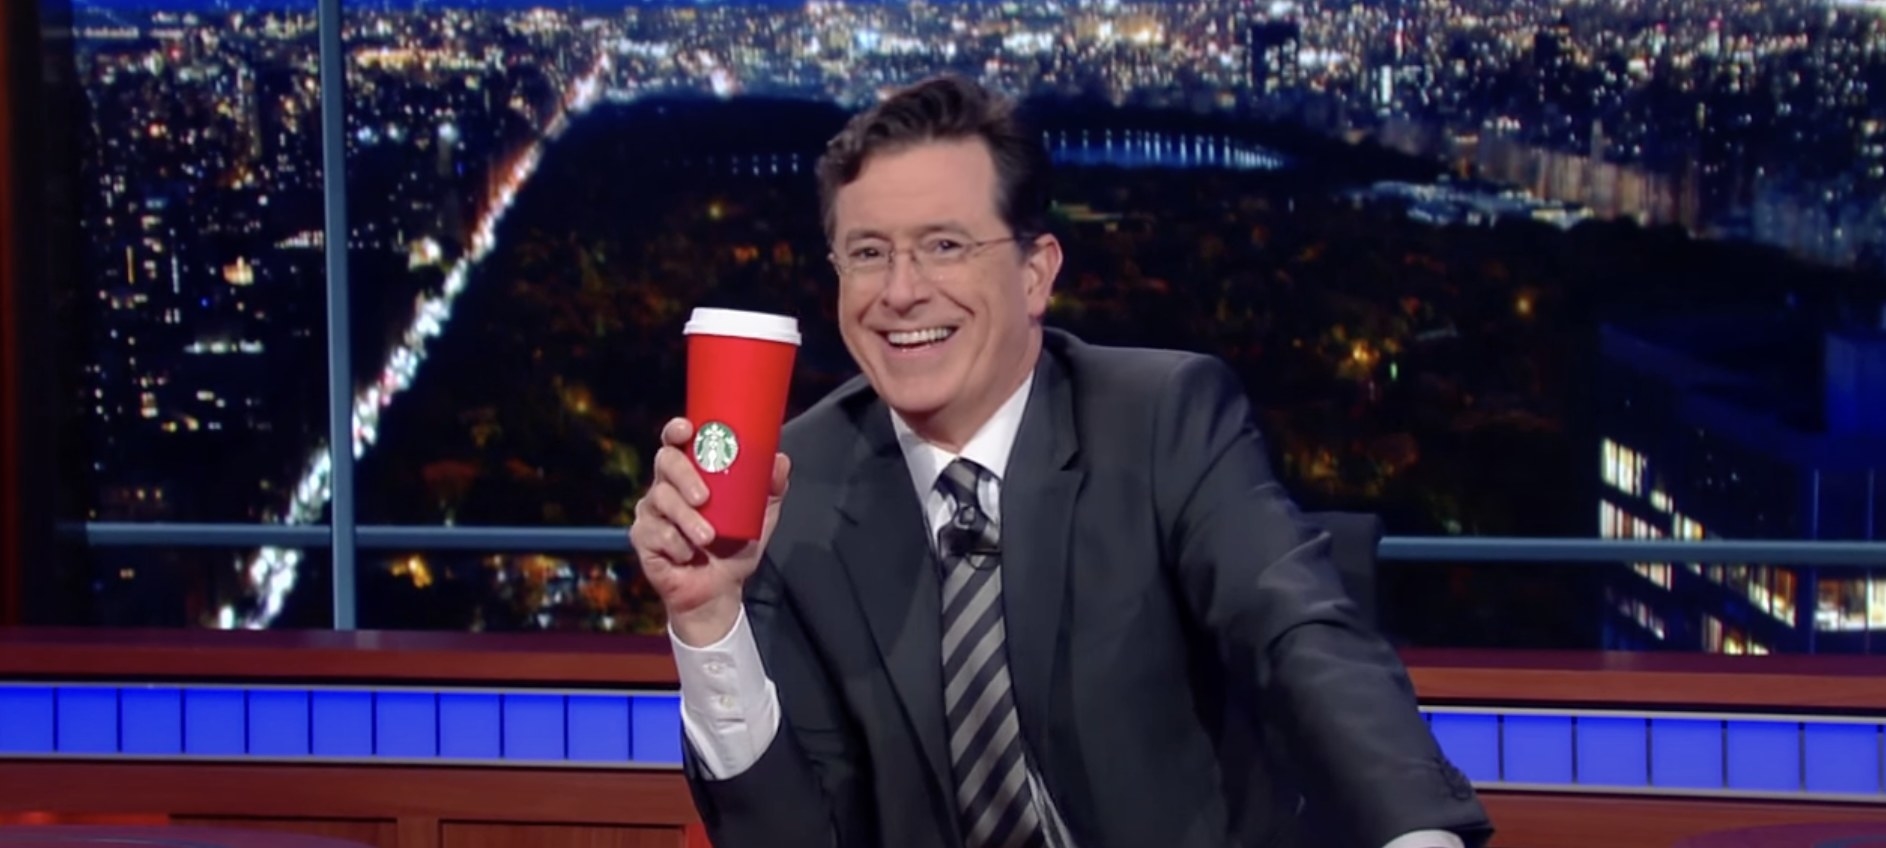 Stephen Colbert holds a red Starbucks cup